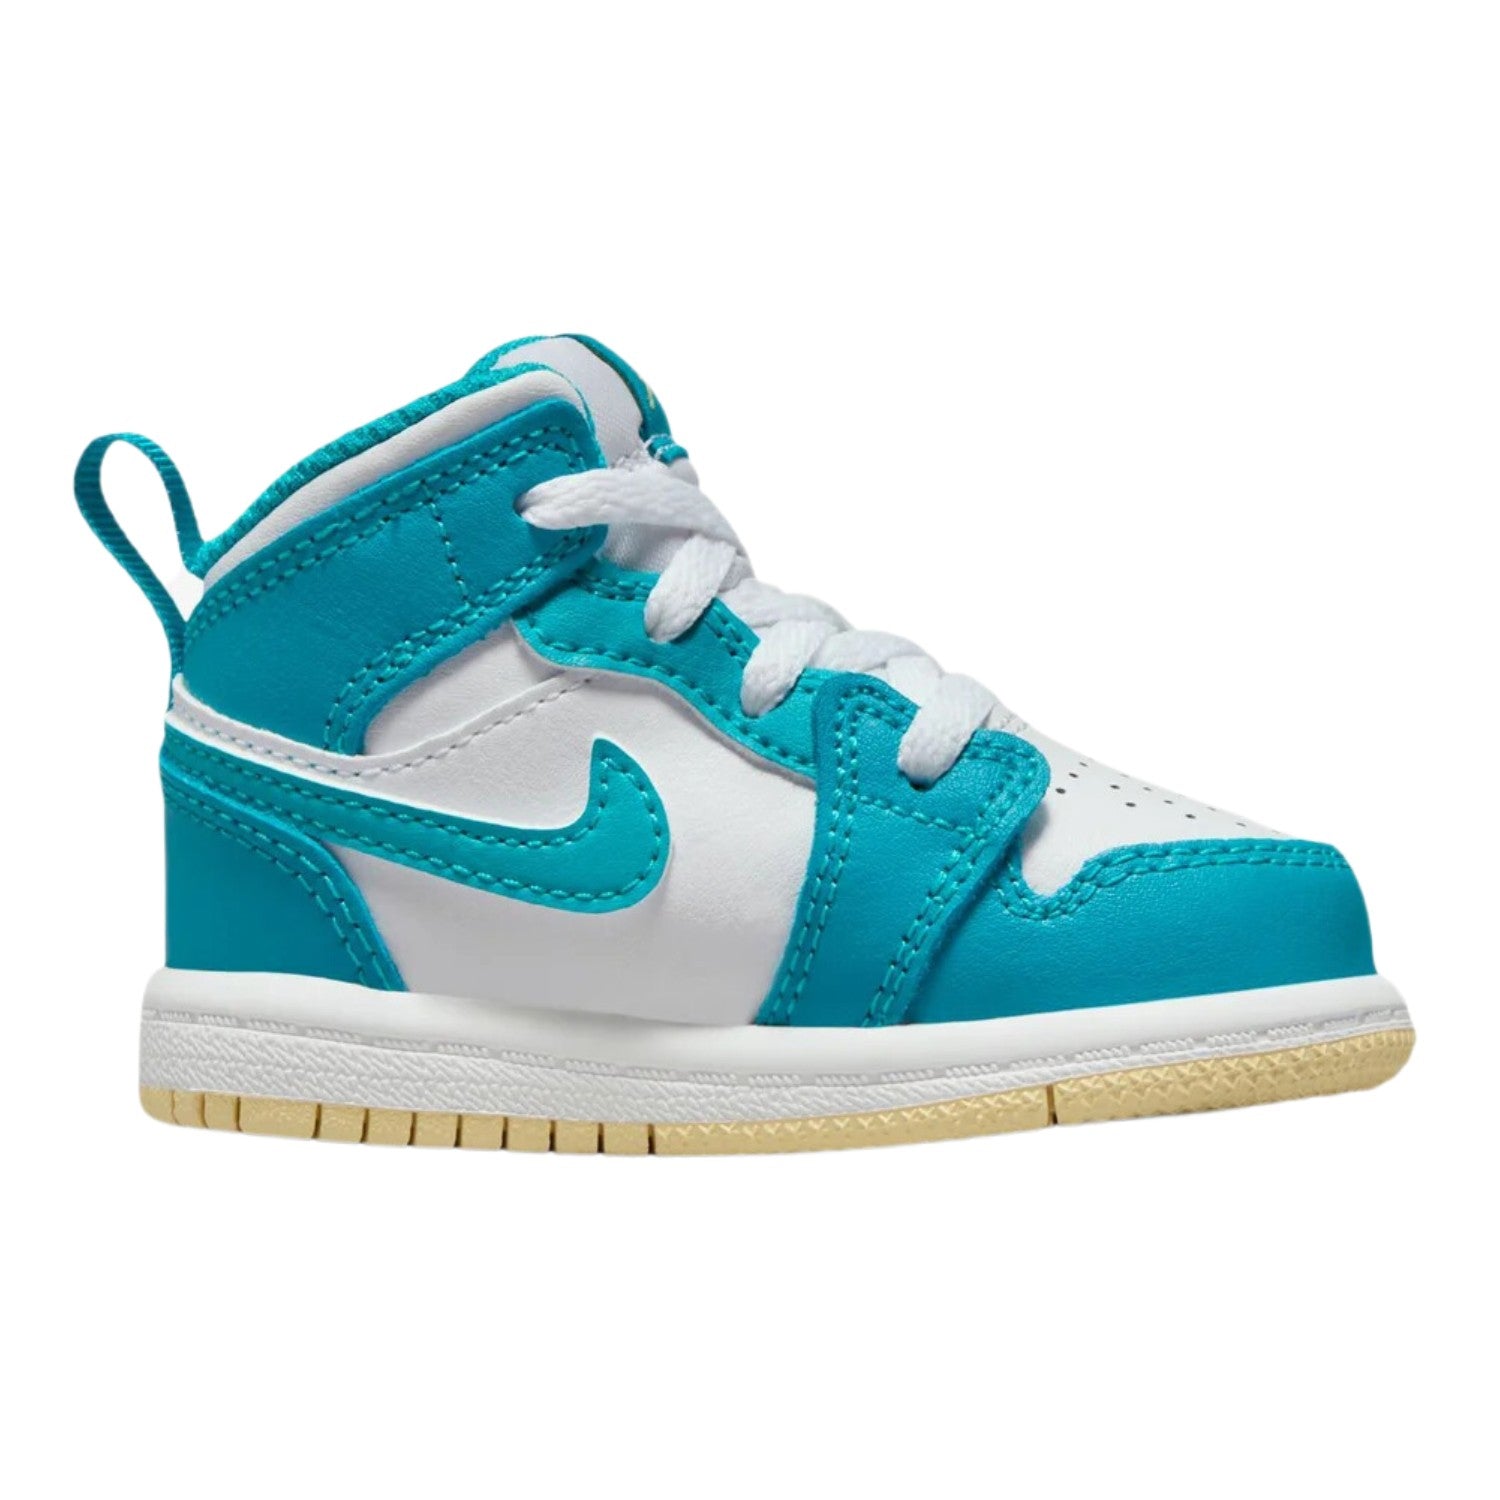 Jordan 1 Mid Toddlers Style : Dq8425-400